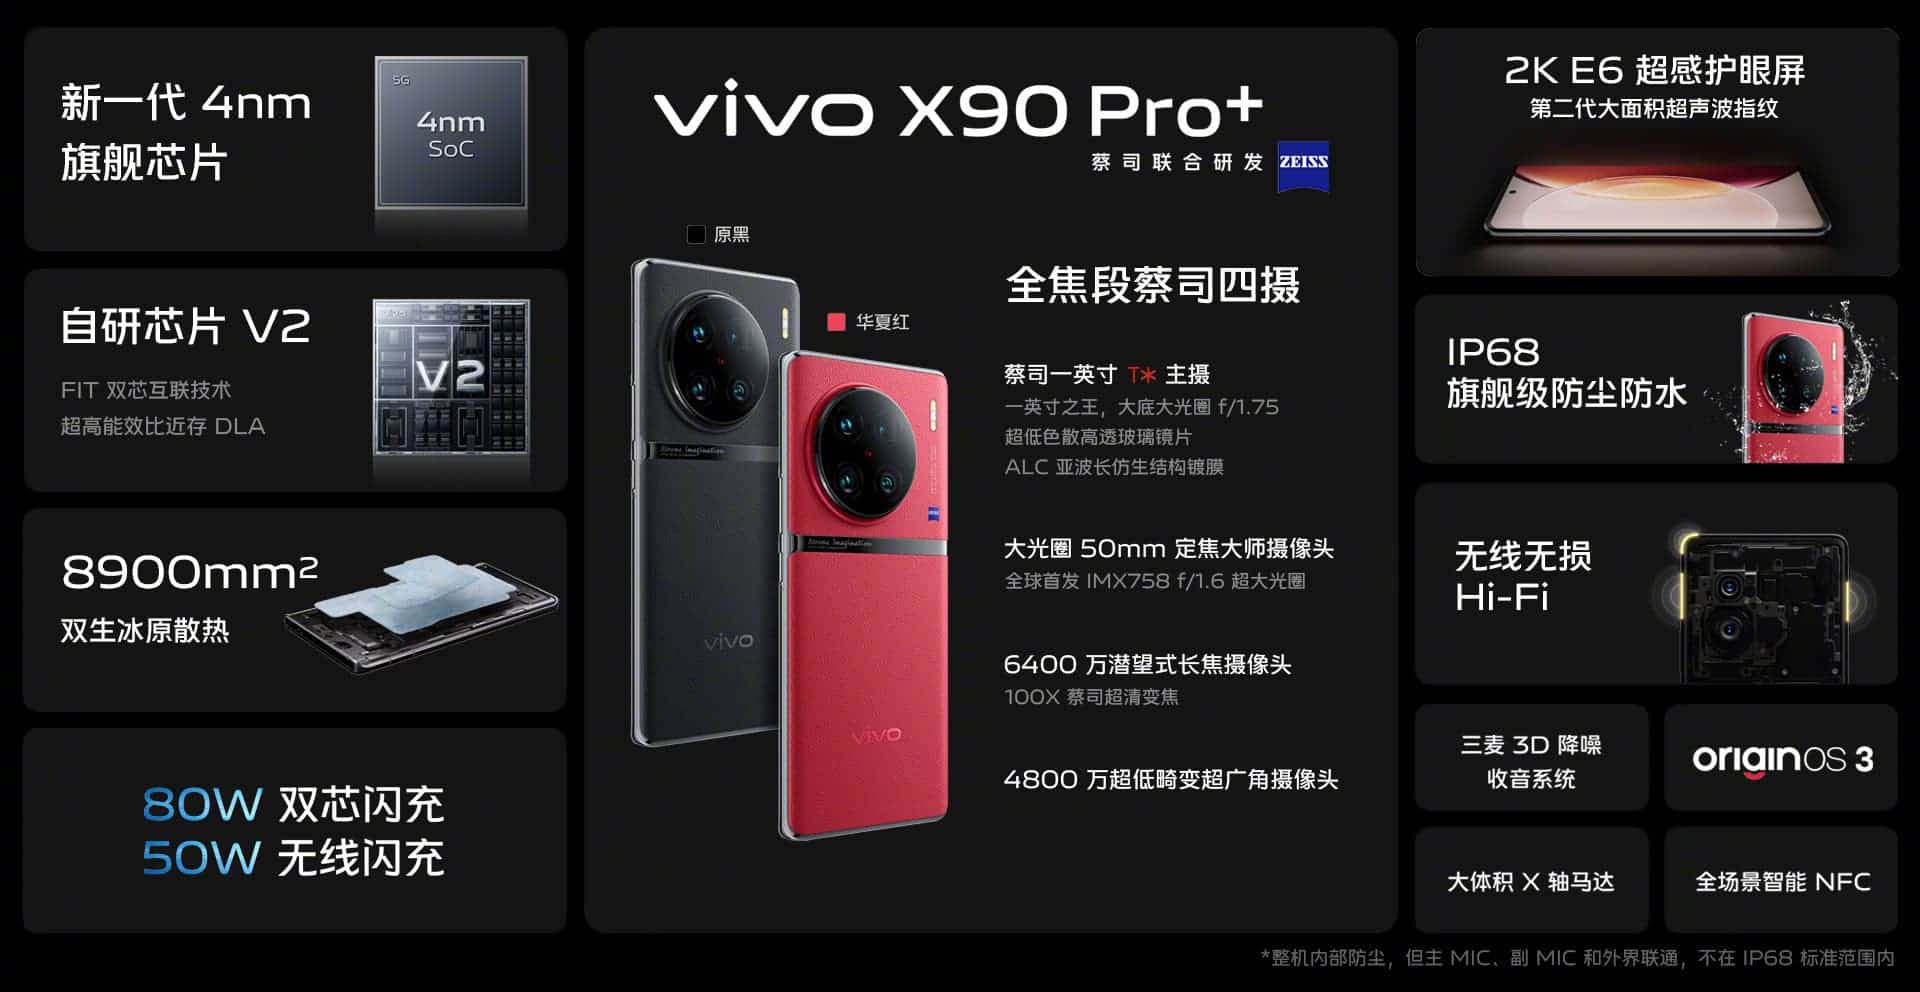 Specifications for VIVO X90 Pro+